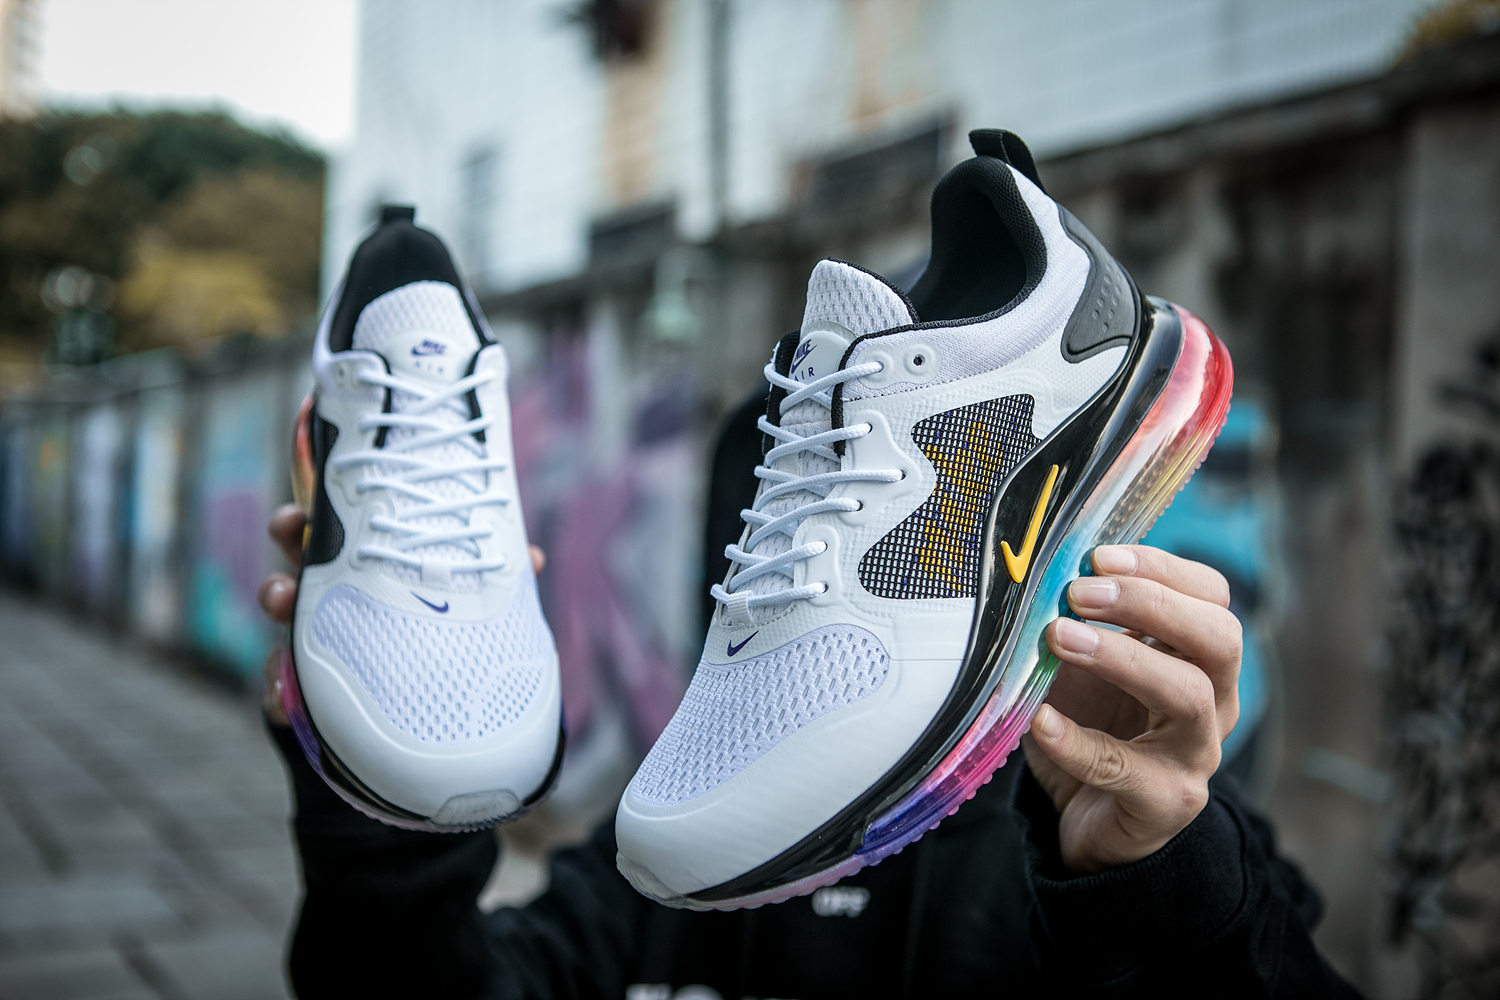 Nike Air Max 720 White Black Colorful Running Shoes